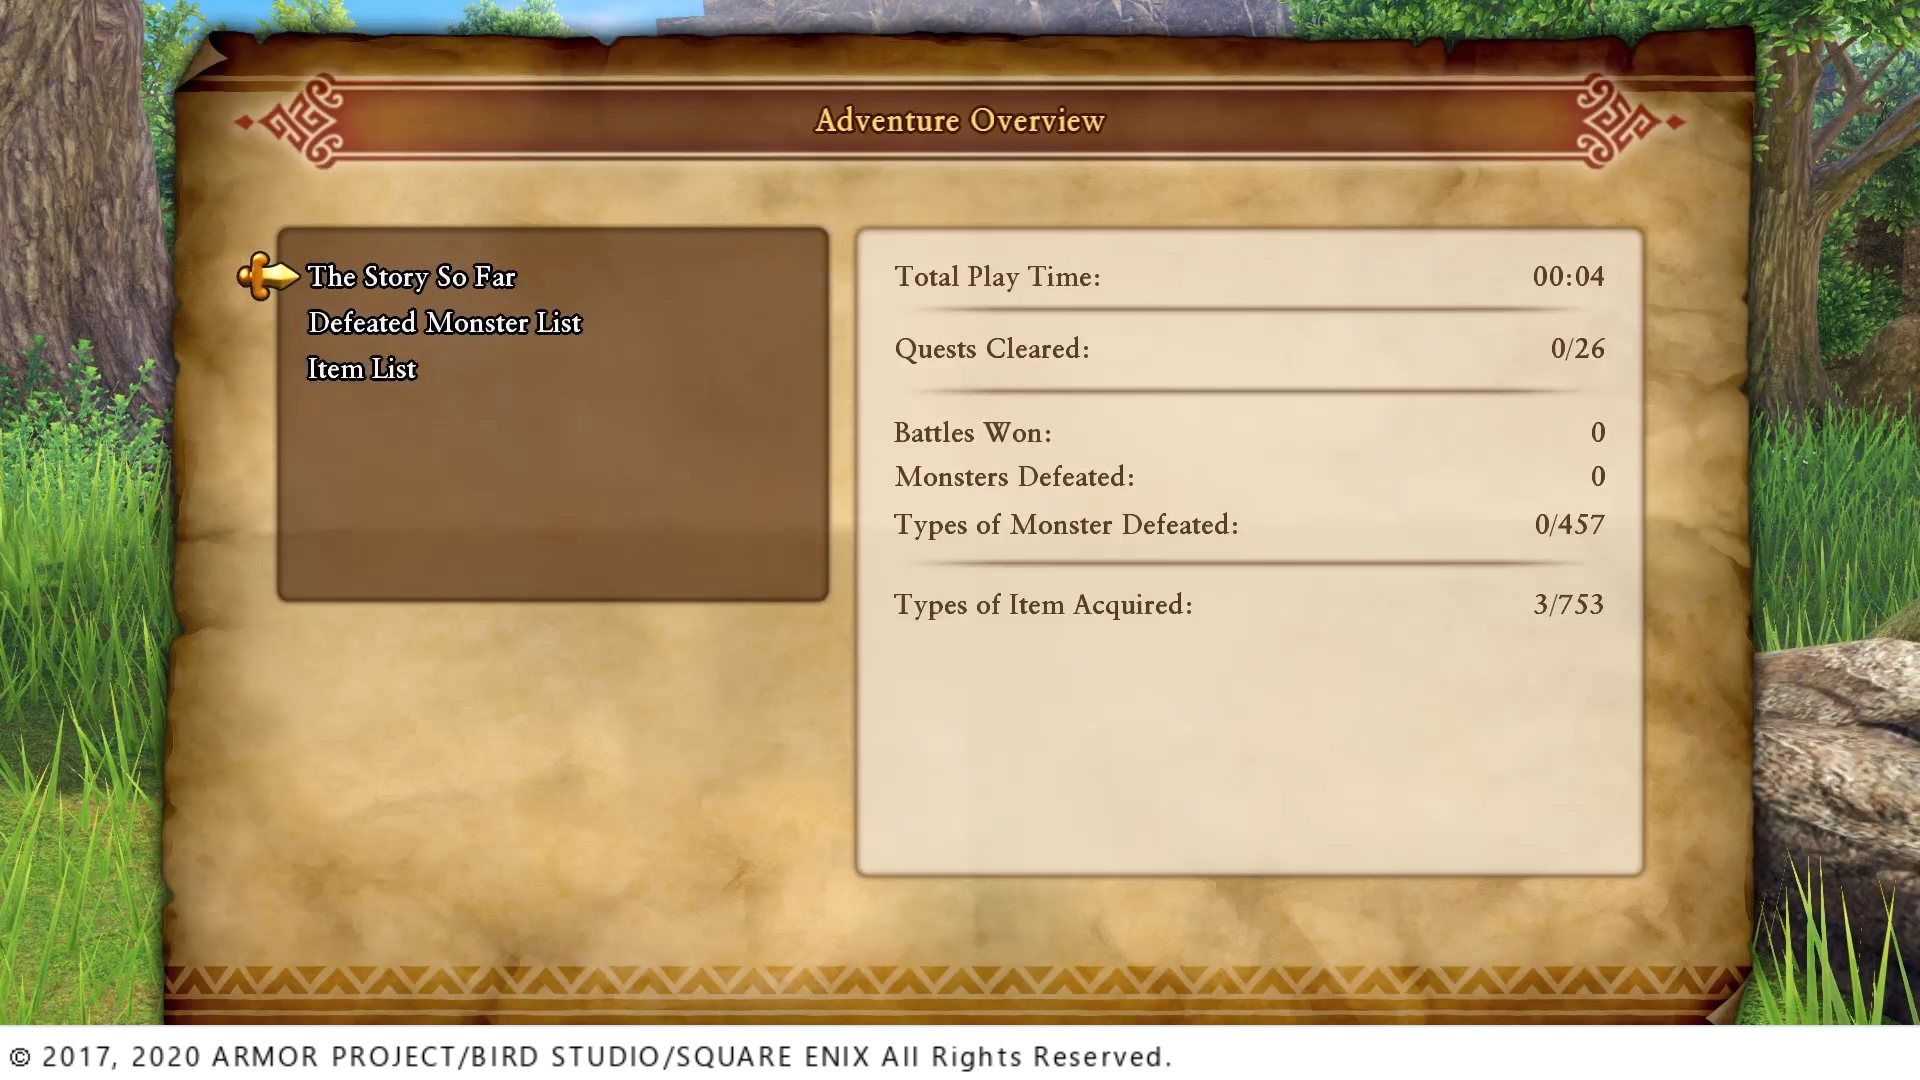 Dragon Quest XI S: Echoes of an Elusive Age screen shot of Adventure Overview menu with an option for "The Story So Far". Copyright on the bottom says "2017, 2020 Armor Project / Bird Studio / Square Enix All Rights Reserved.